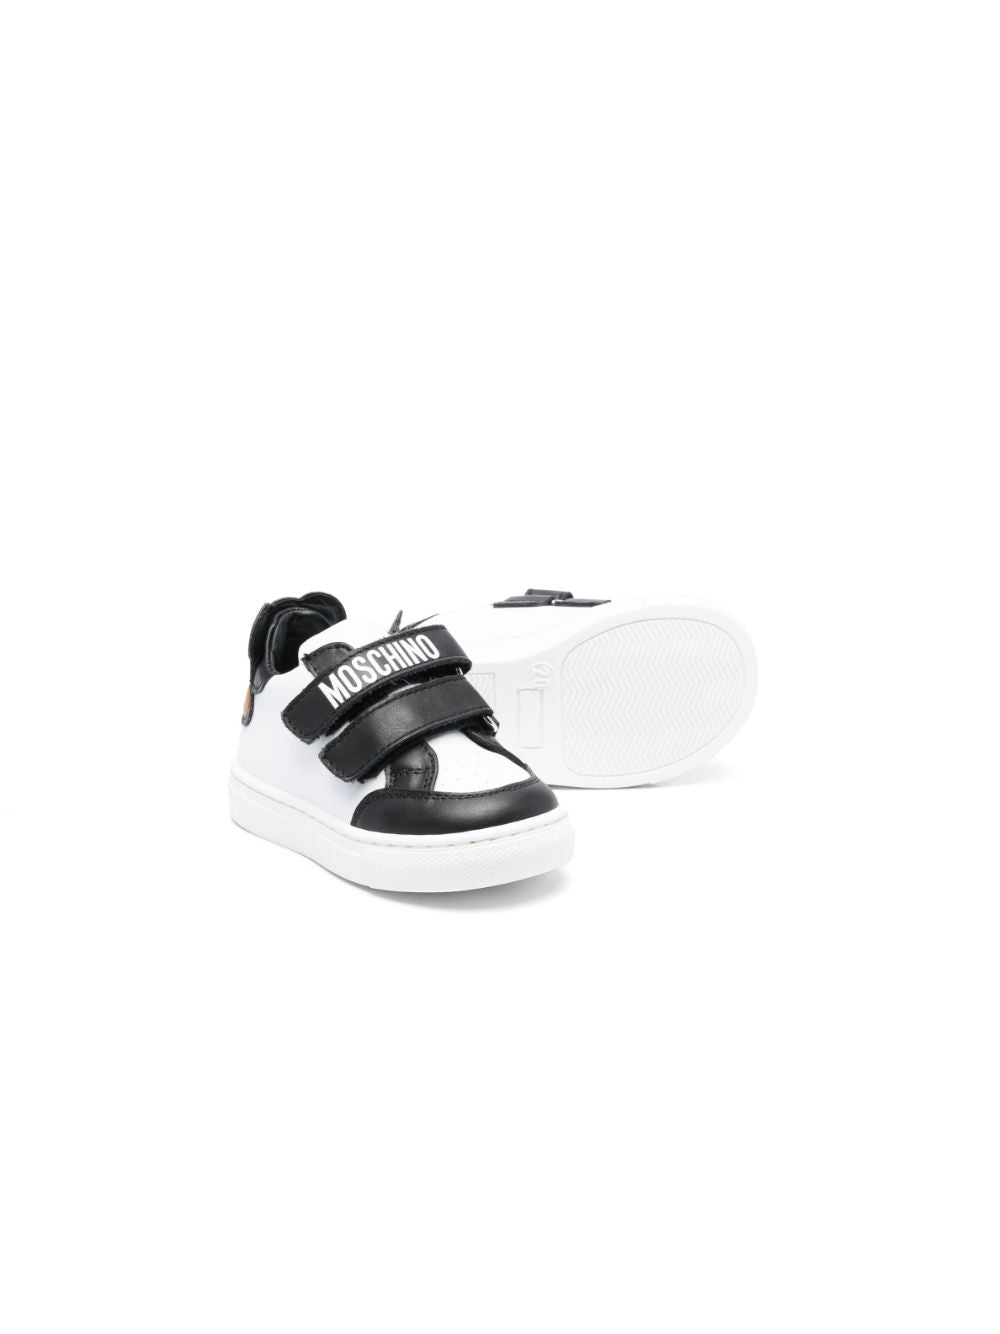 Black and white sneakers for children with logo